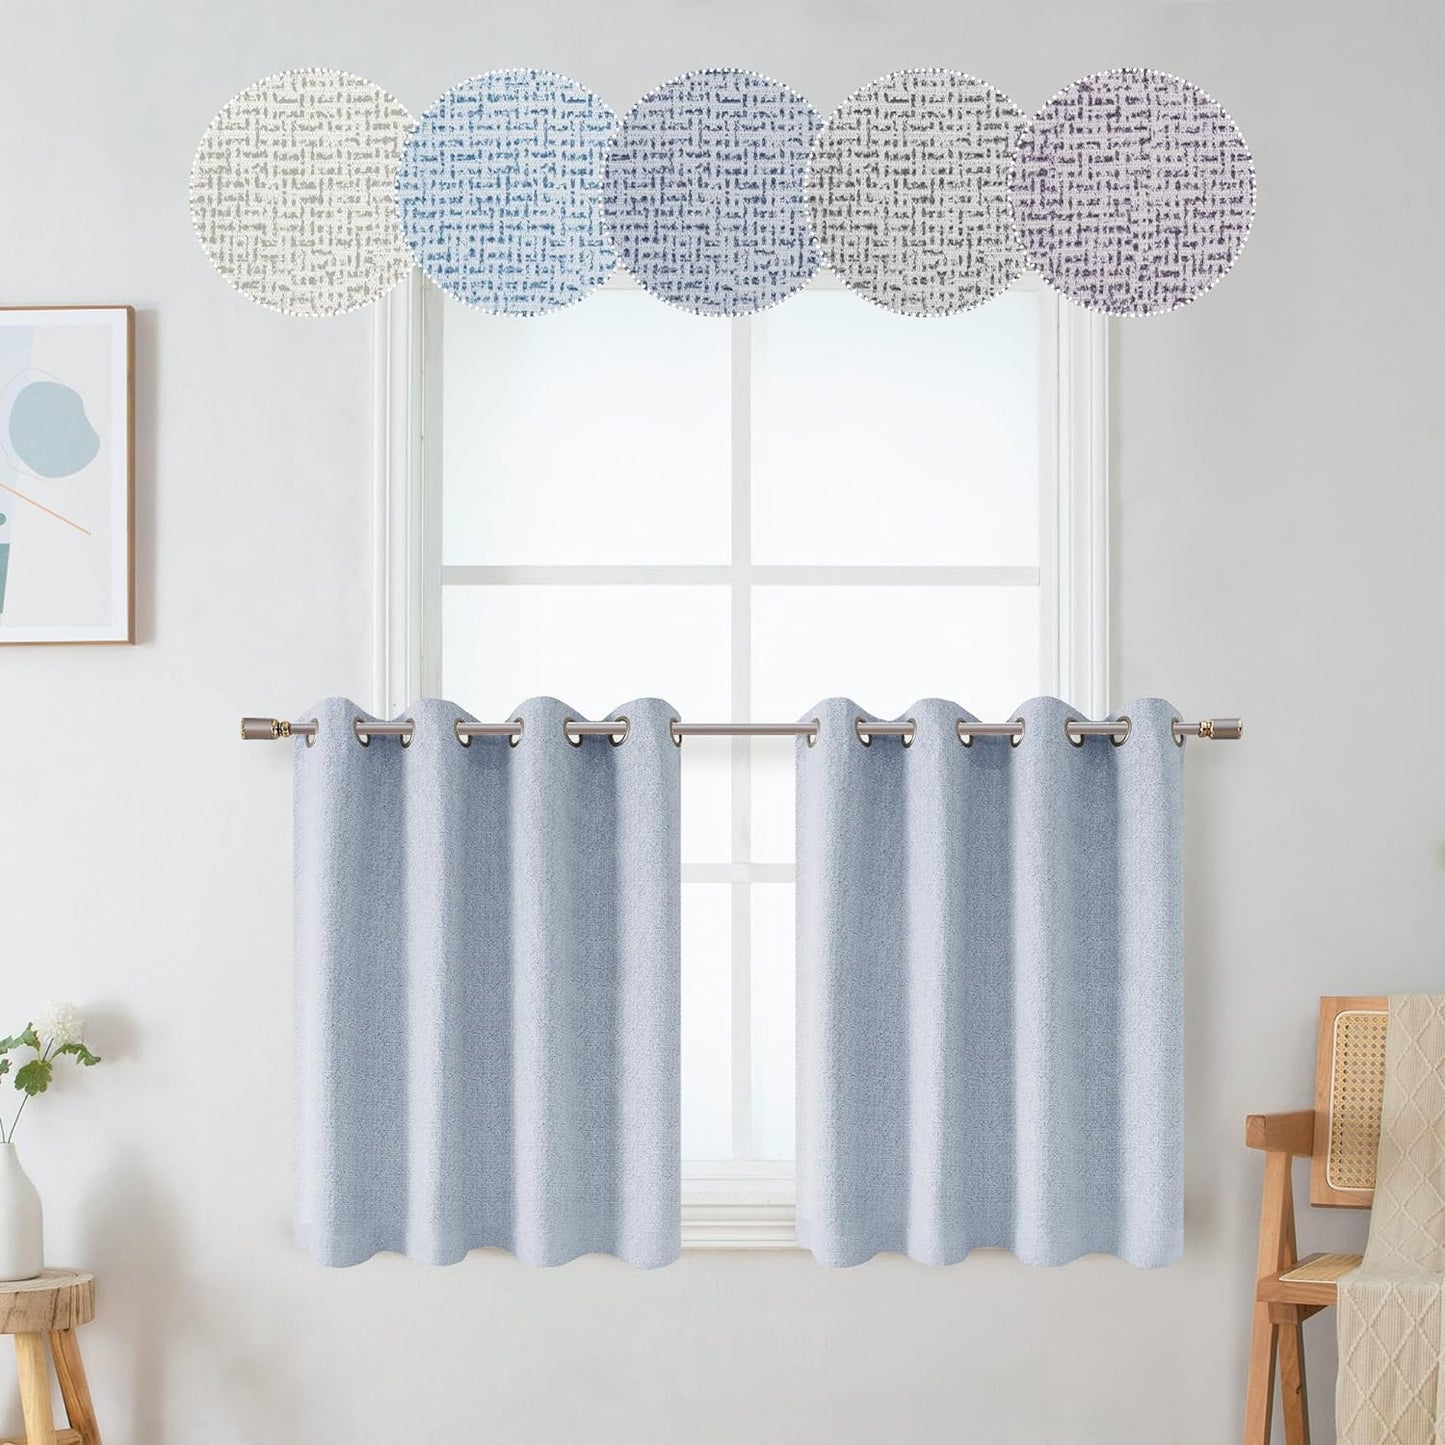 OWENIE Luke Black Out Curtains 63 Inch Long 2 Panels for Bedroom, Geometric Printed Completely Blackout Room Darkening Curtains, Grommet Thermal Insulated Living Room Curtain, 2 PCS, Each 42Wx63L Inch  OWENIE Light Blue 42"W X 24"L | 2 Pcs 